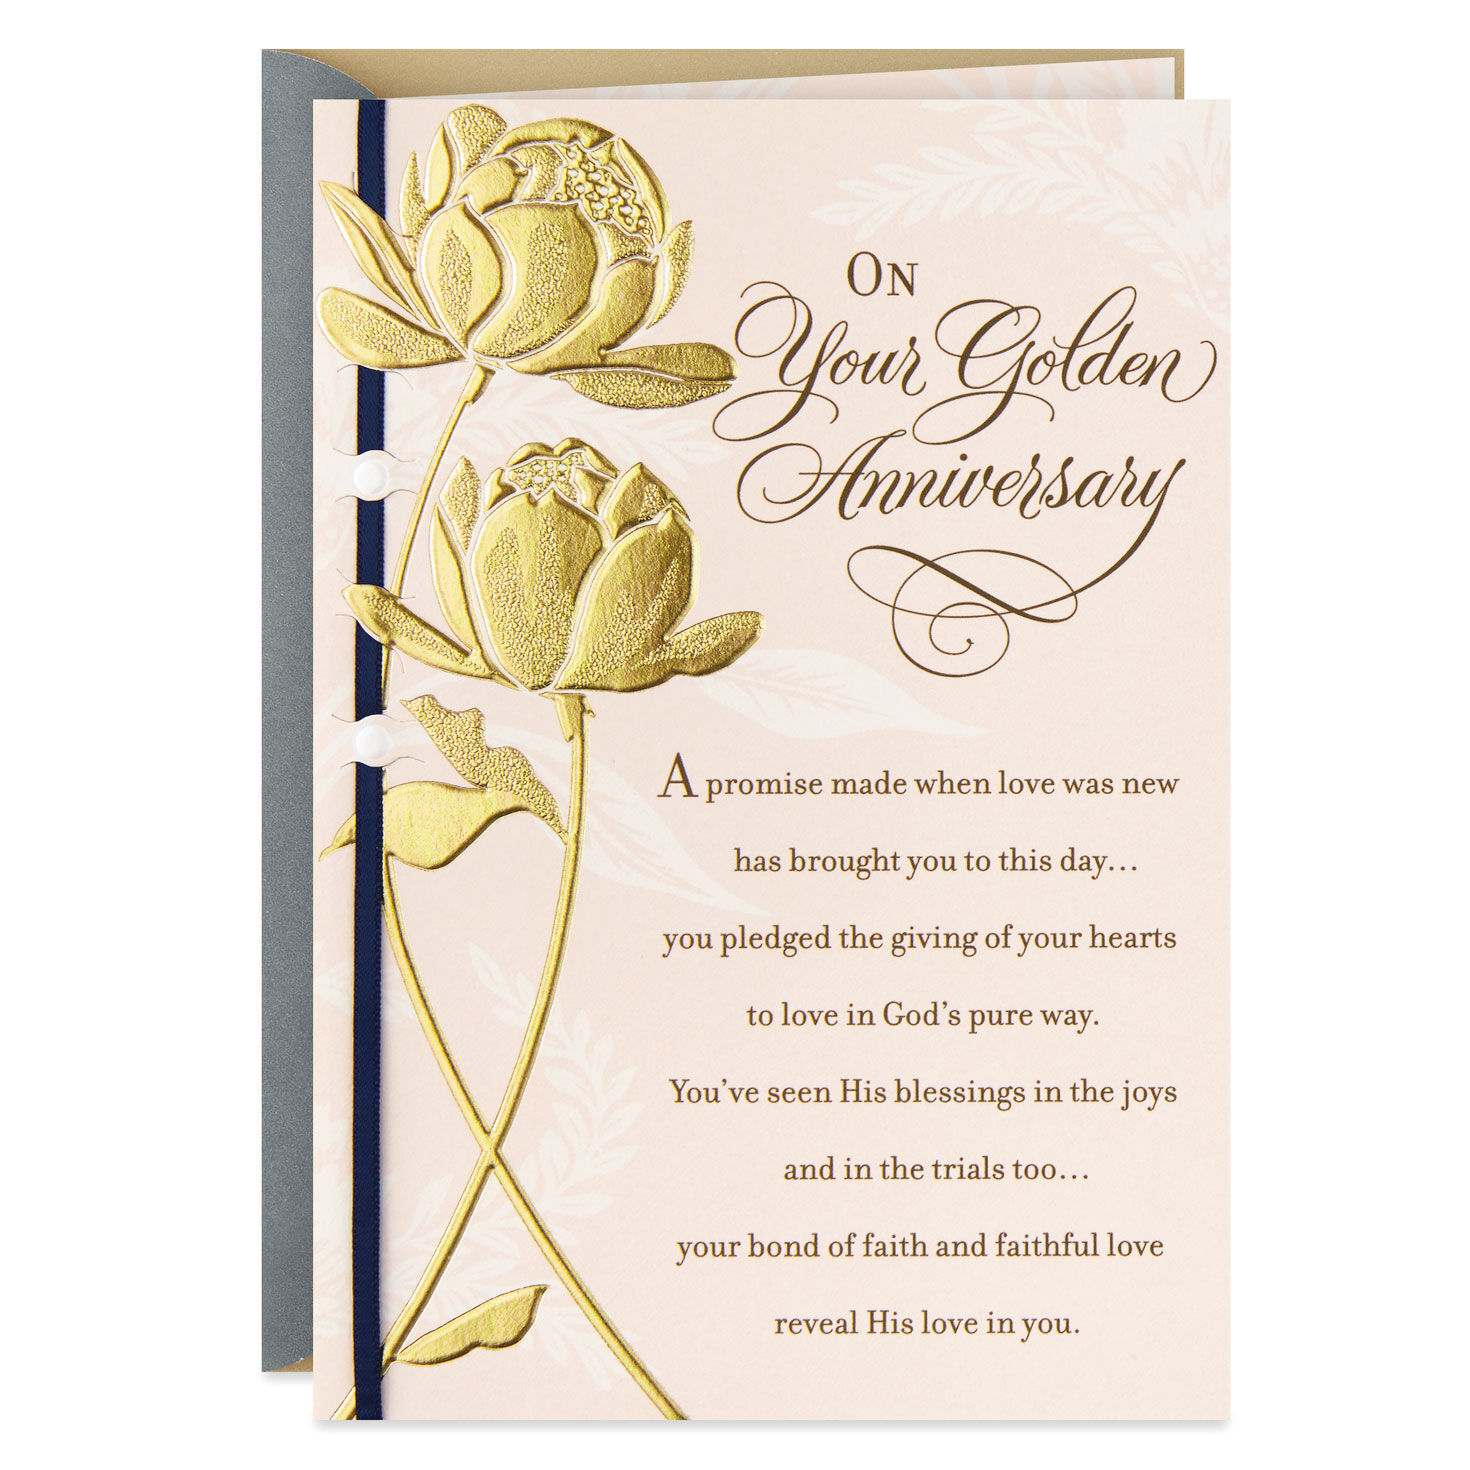 Personalised Gold Golden Wedding Anniversary Card Hearts Tree Design 50 Years 